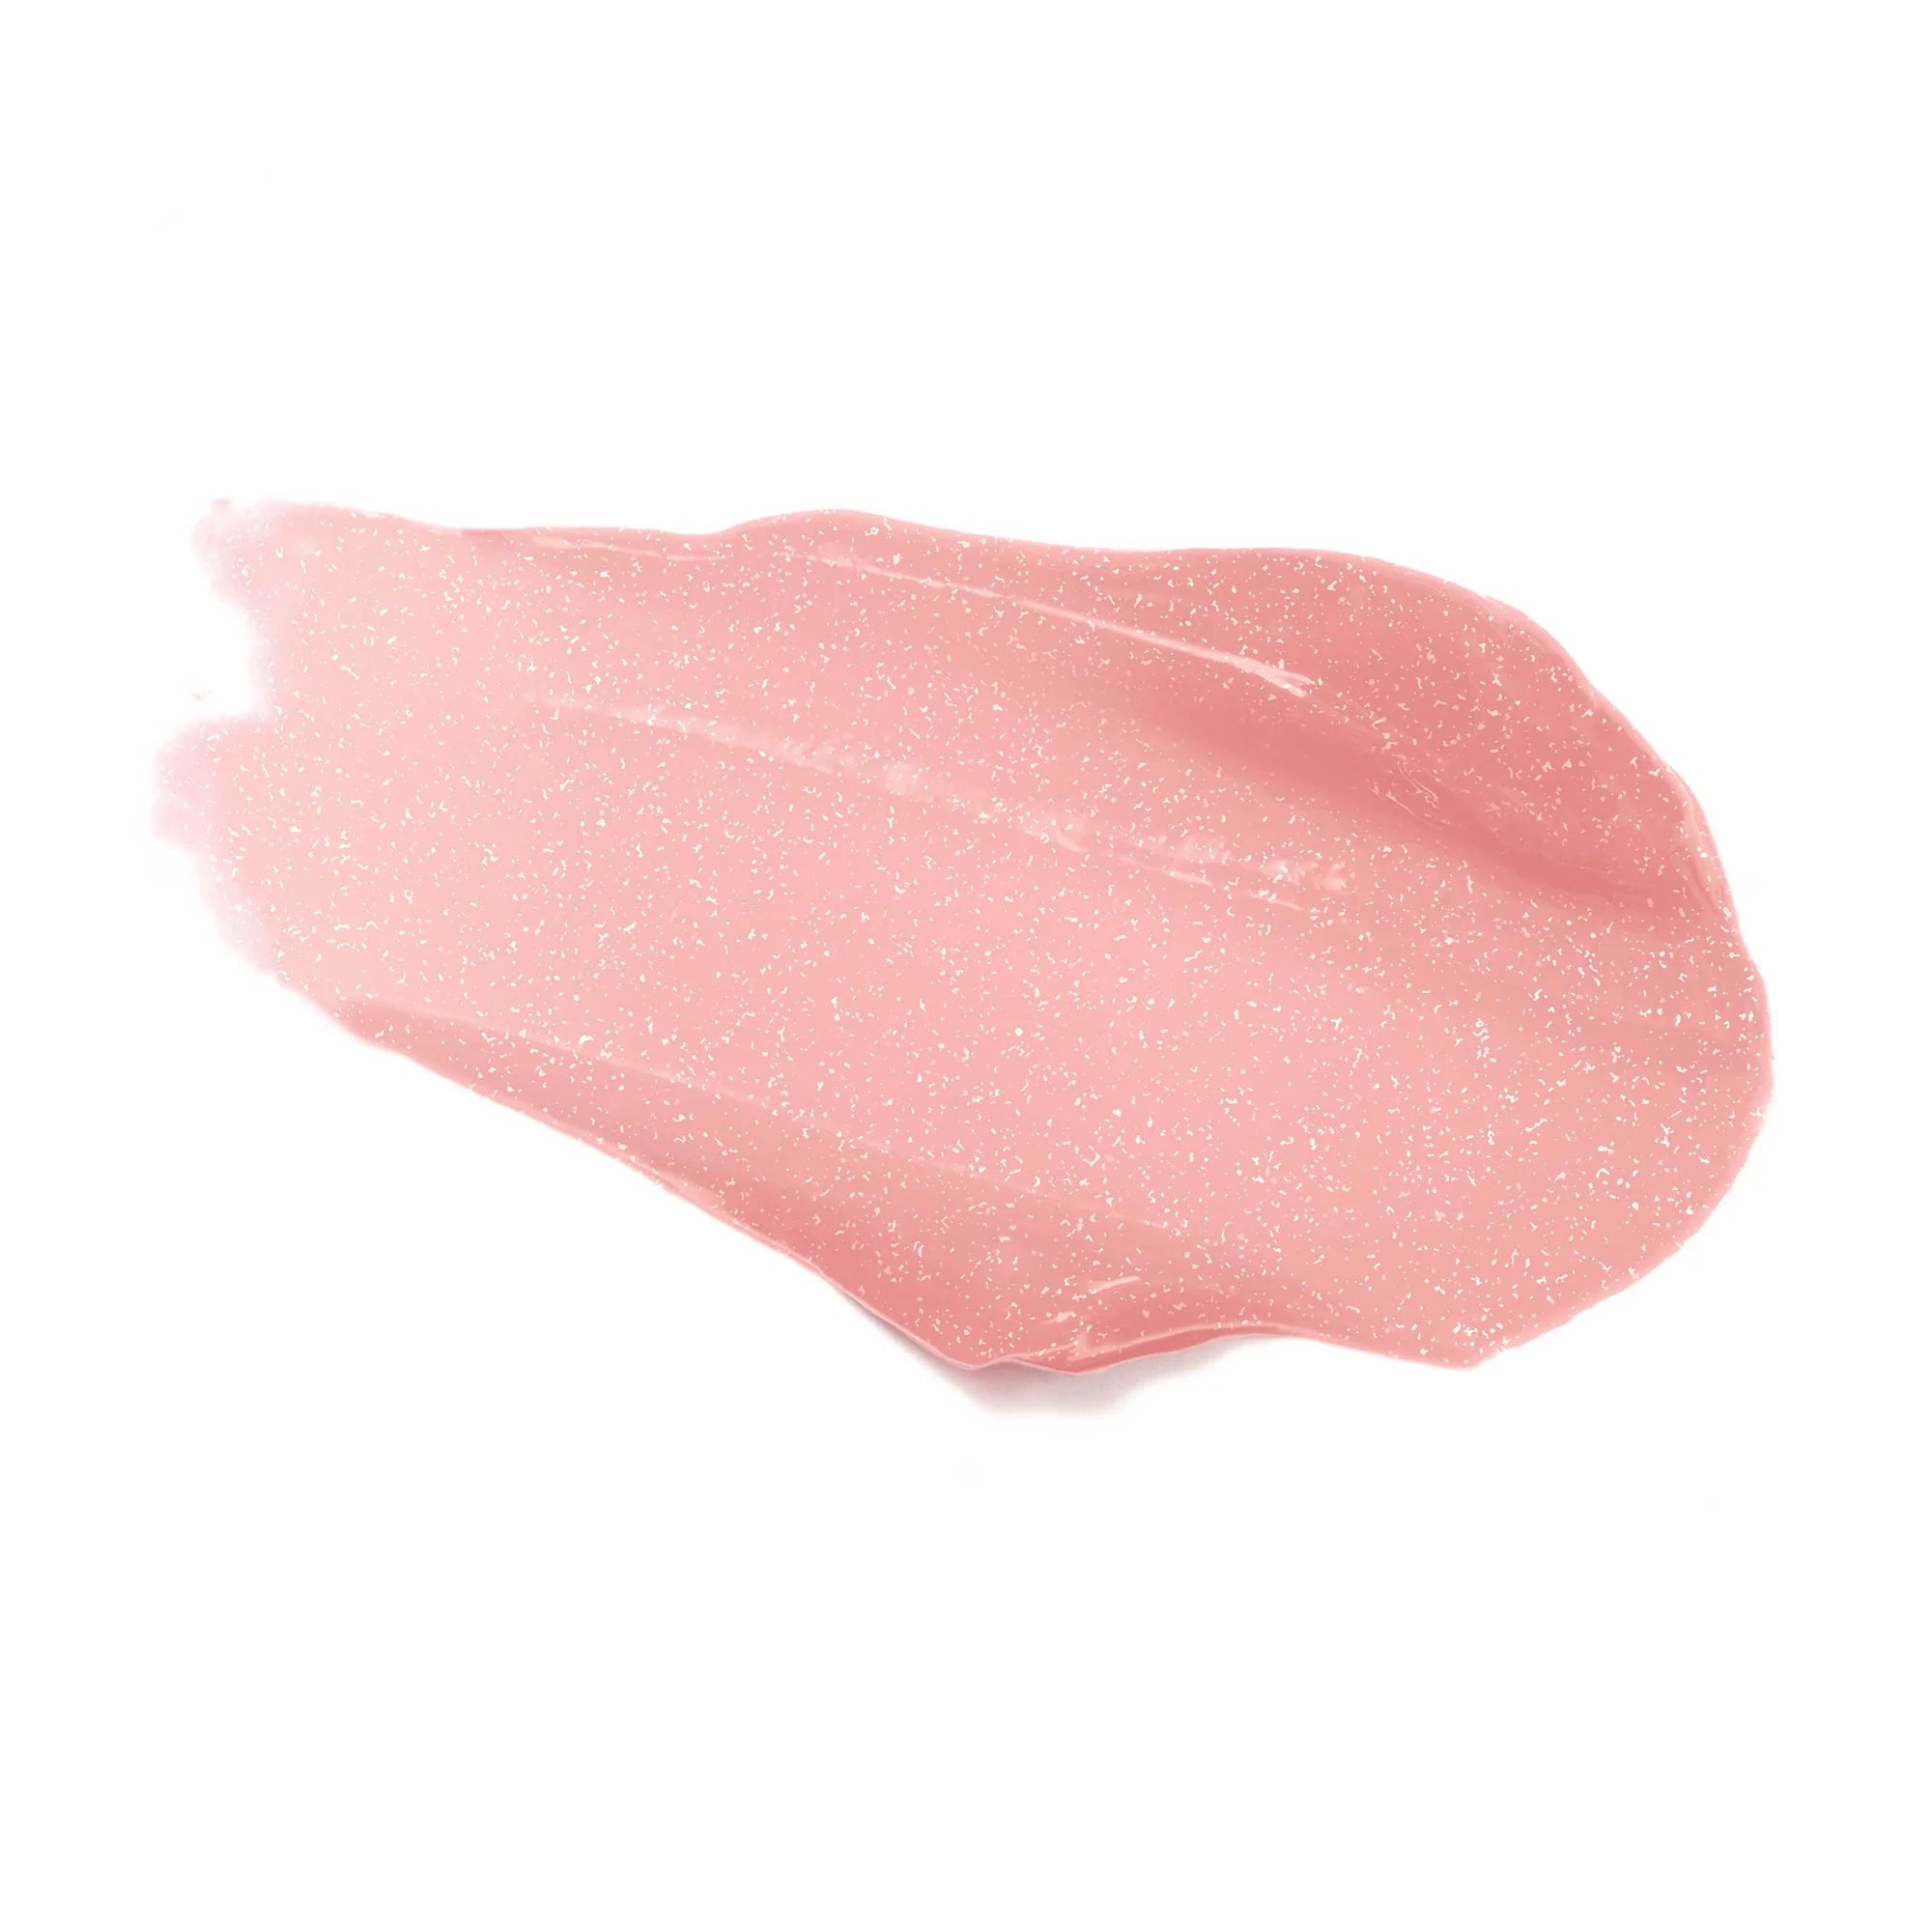 Jane Iredale's HydroPure™ Hyaluronic Lip Gloss - shade Pink Glacé - sheer cool pink with shimmer